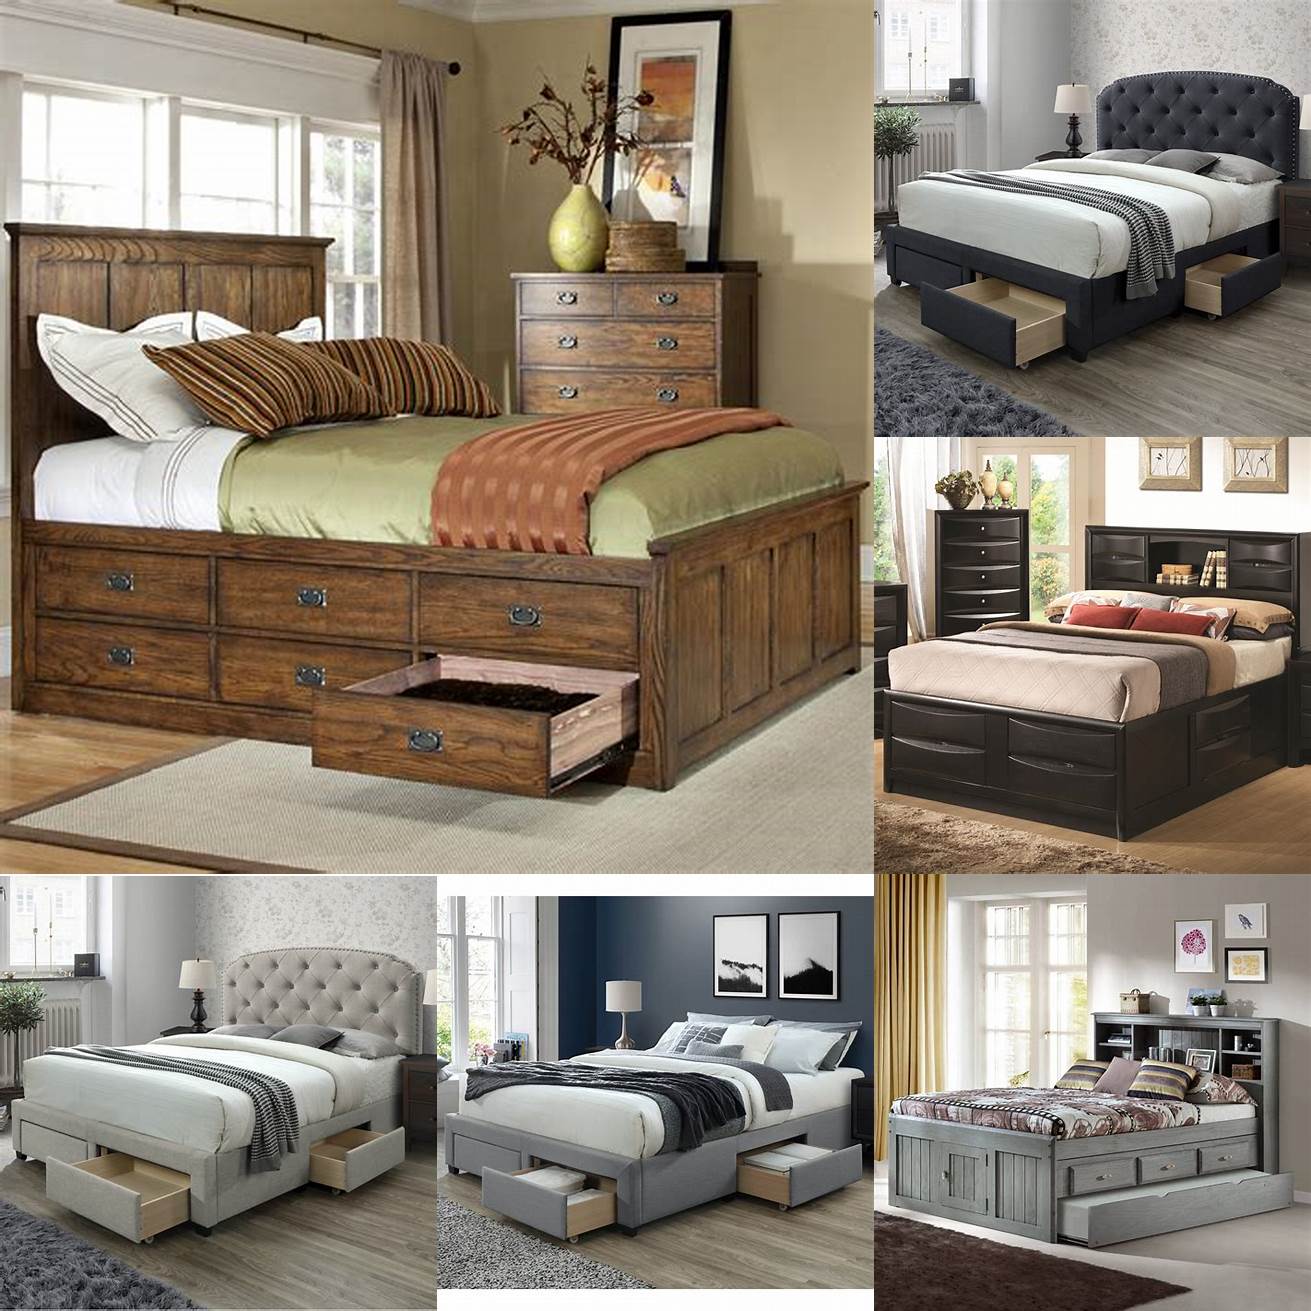 Image of a king size bed with drawers